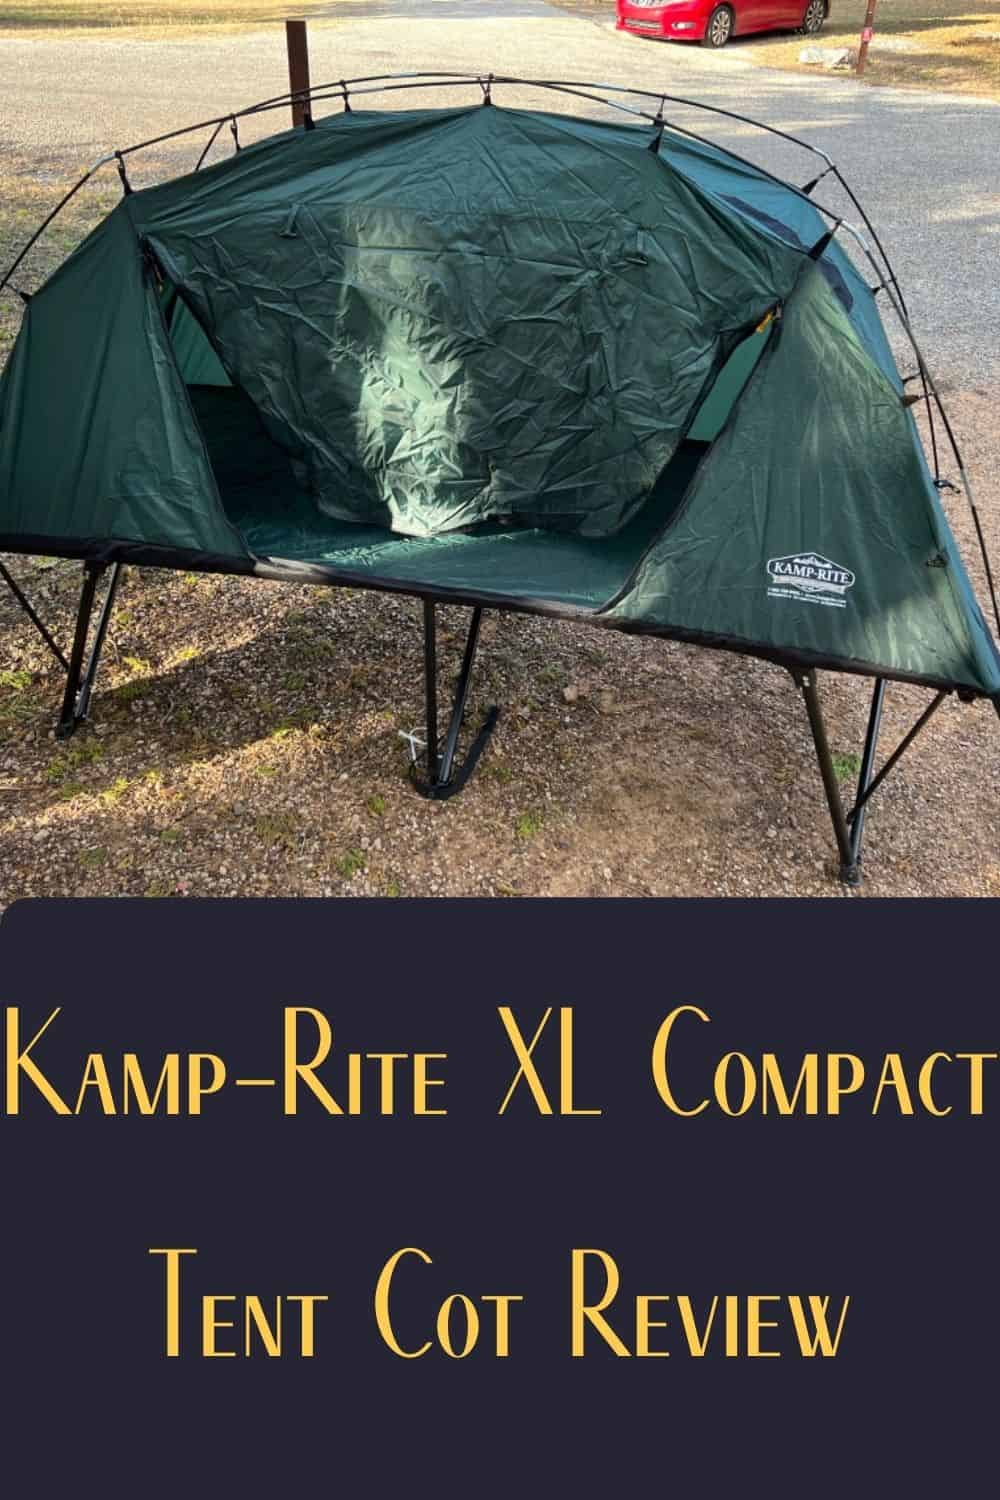 Pinterest image for Kamp-Rite XL Compact Tent Cot Review